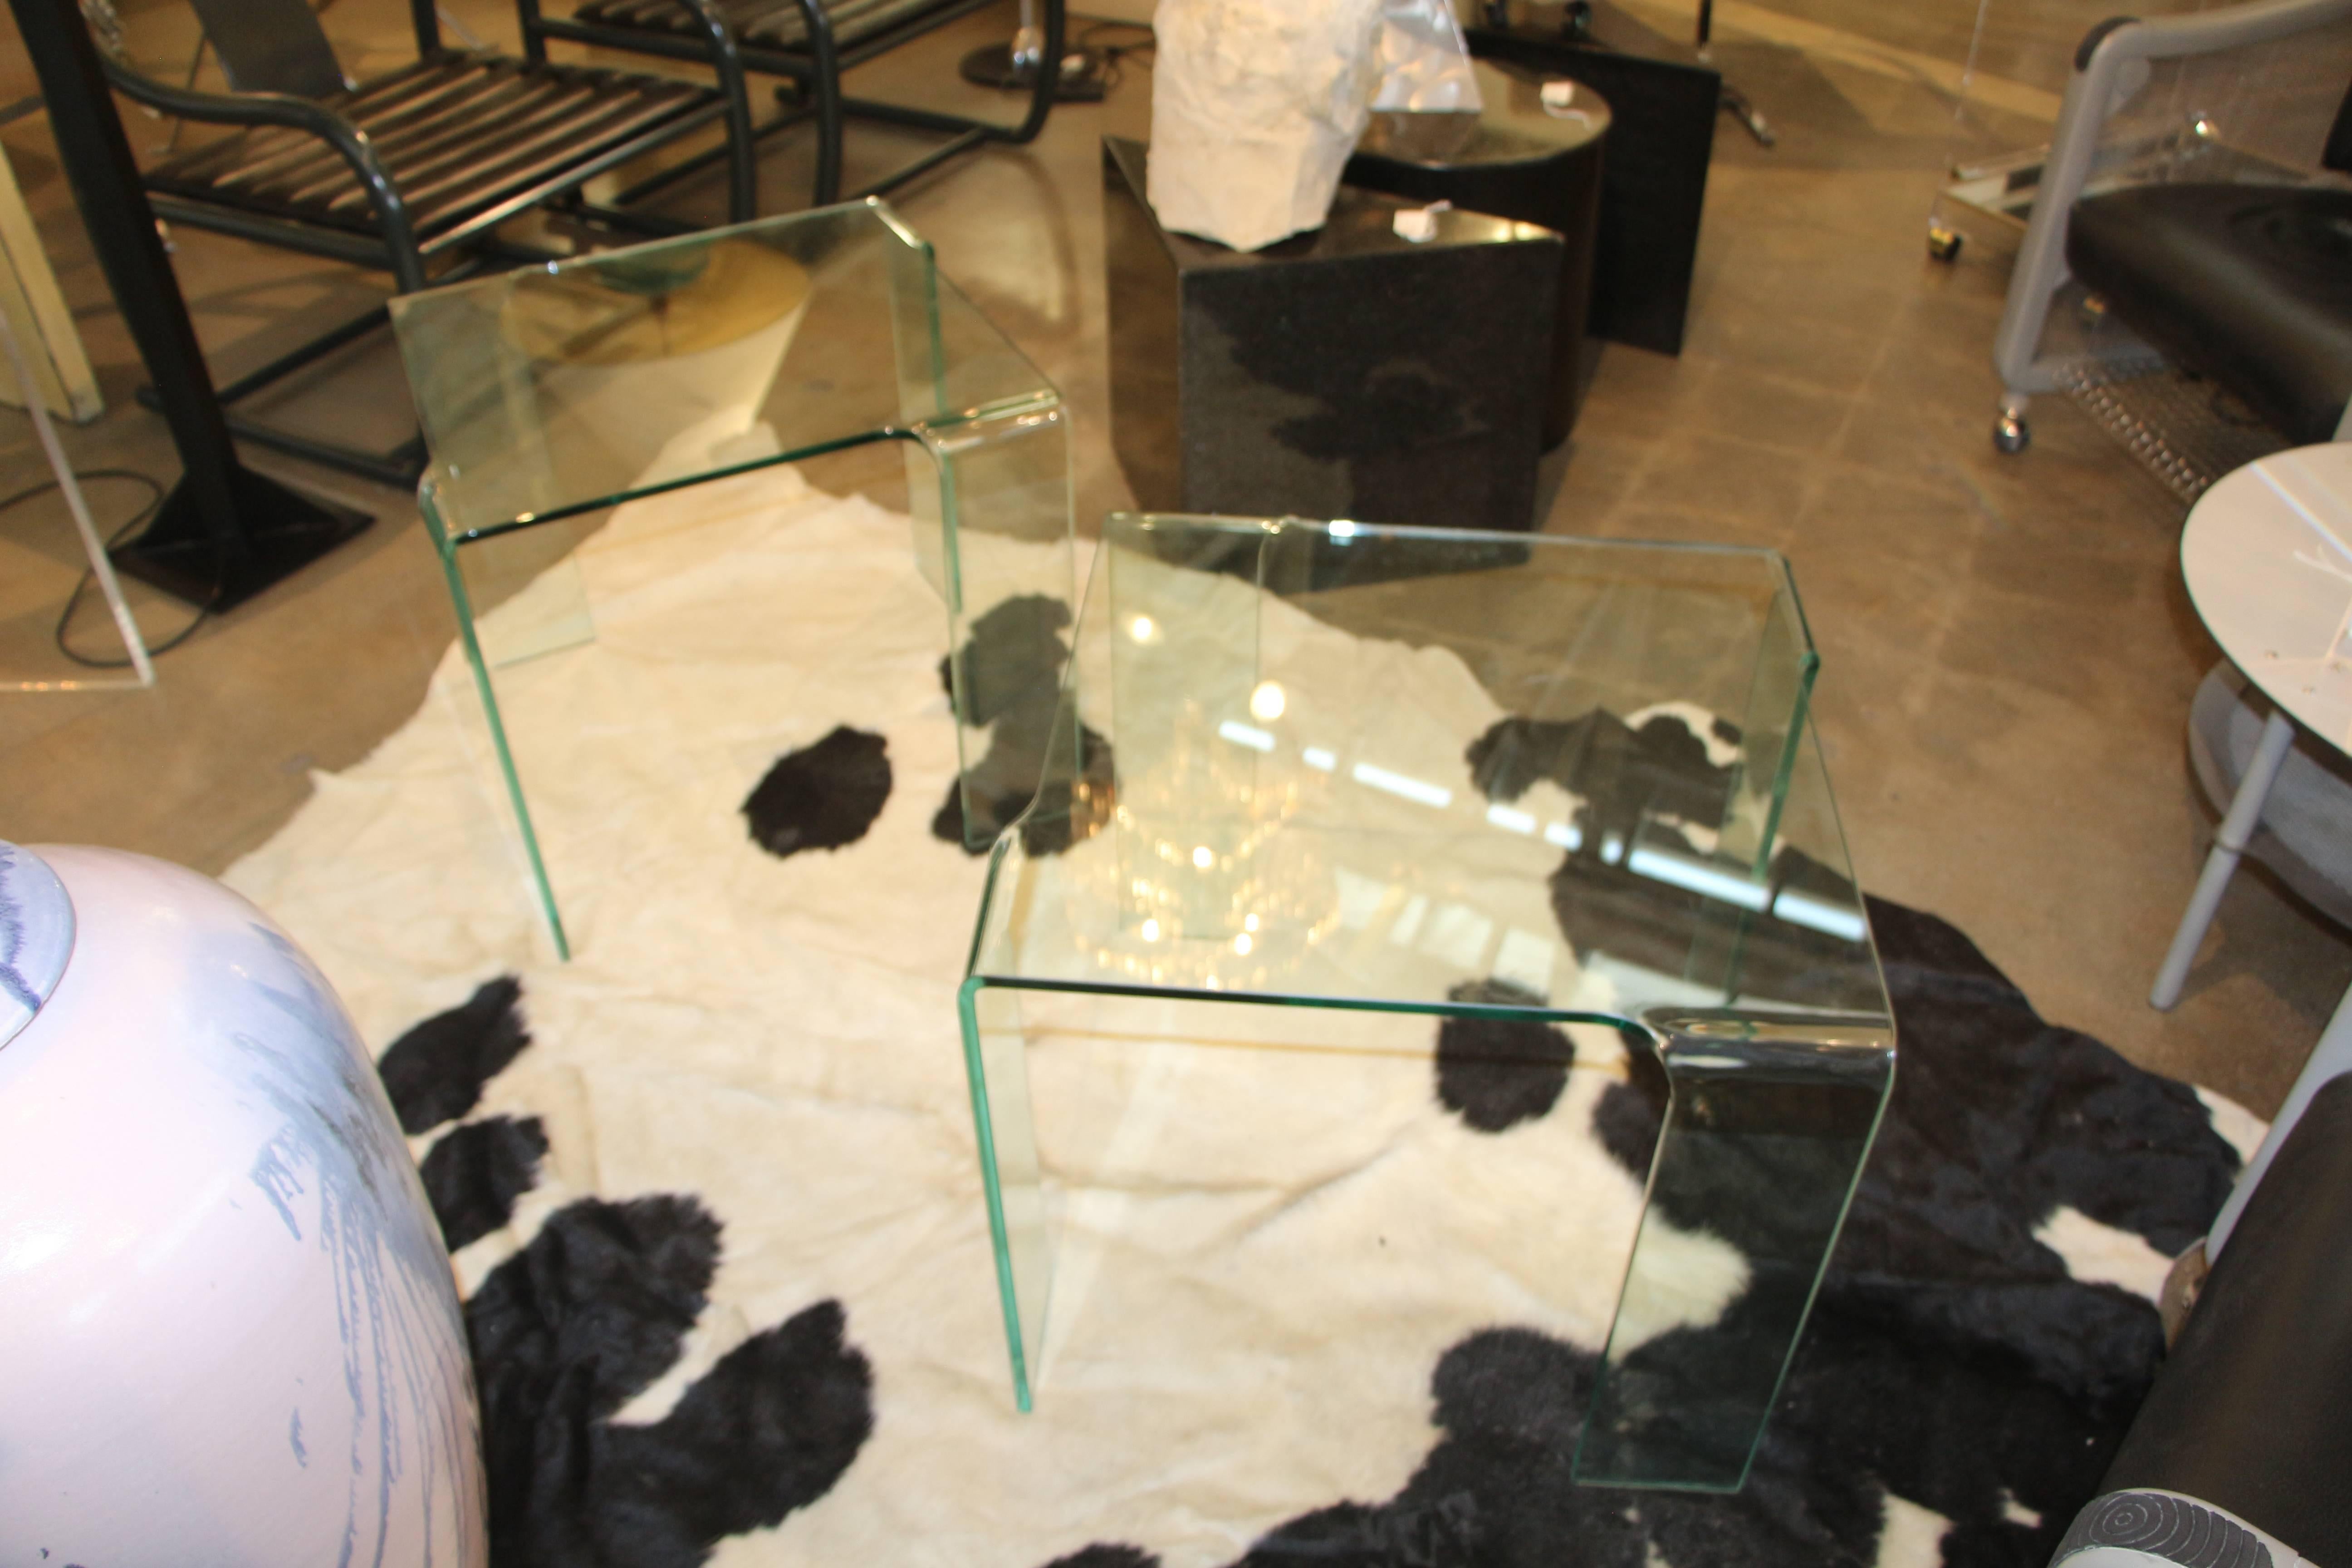 An elegant pair of Italian glass end tables attributable to Fiam likely from the 1980s. In good age appropriate condition, with no chips, but surface scratches and minor imperfections.